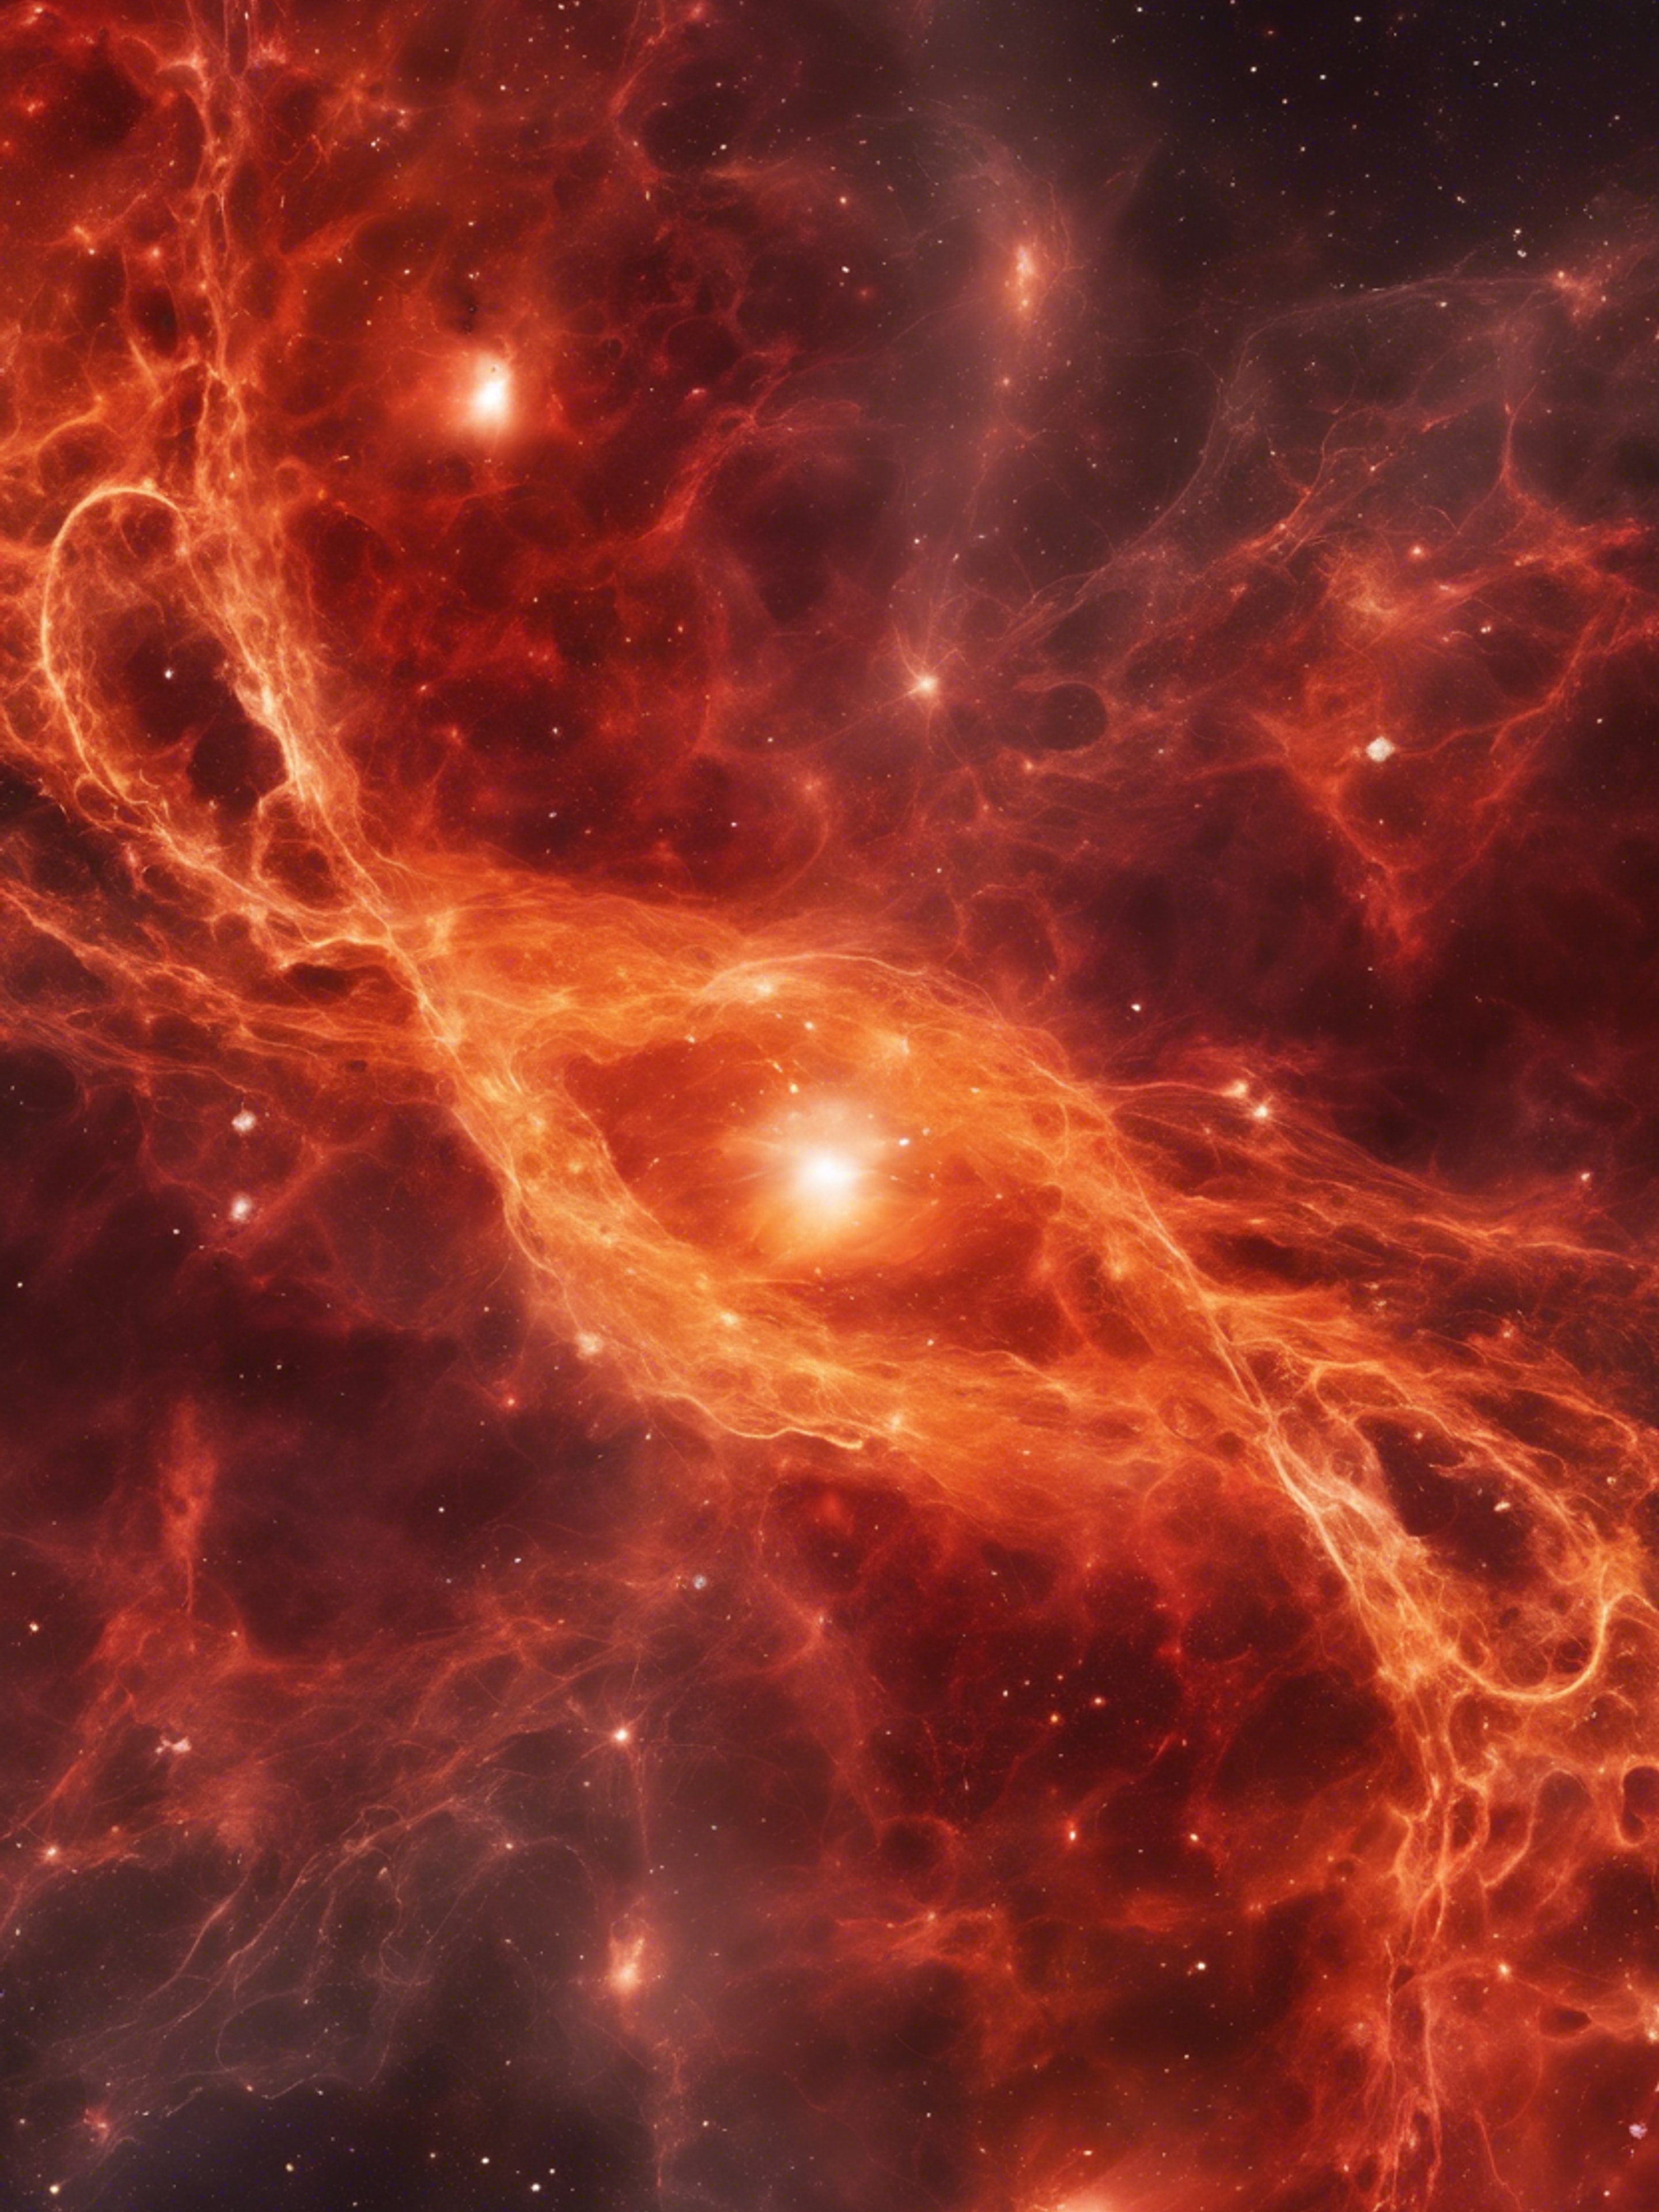 Red and orange nebula moving in chaos to form an alluring abstract pattern, lost in an endless loop. ورق الجدران[8b81d5815a2d445c9bb4]